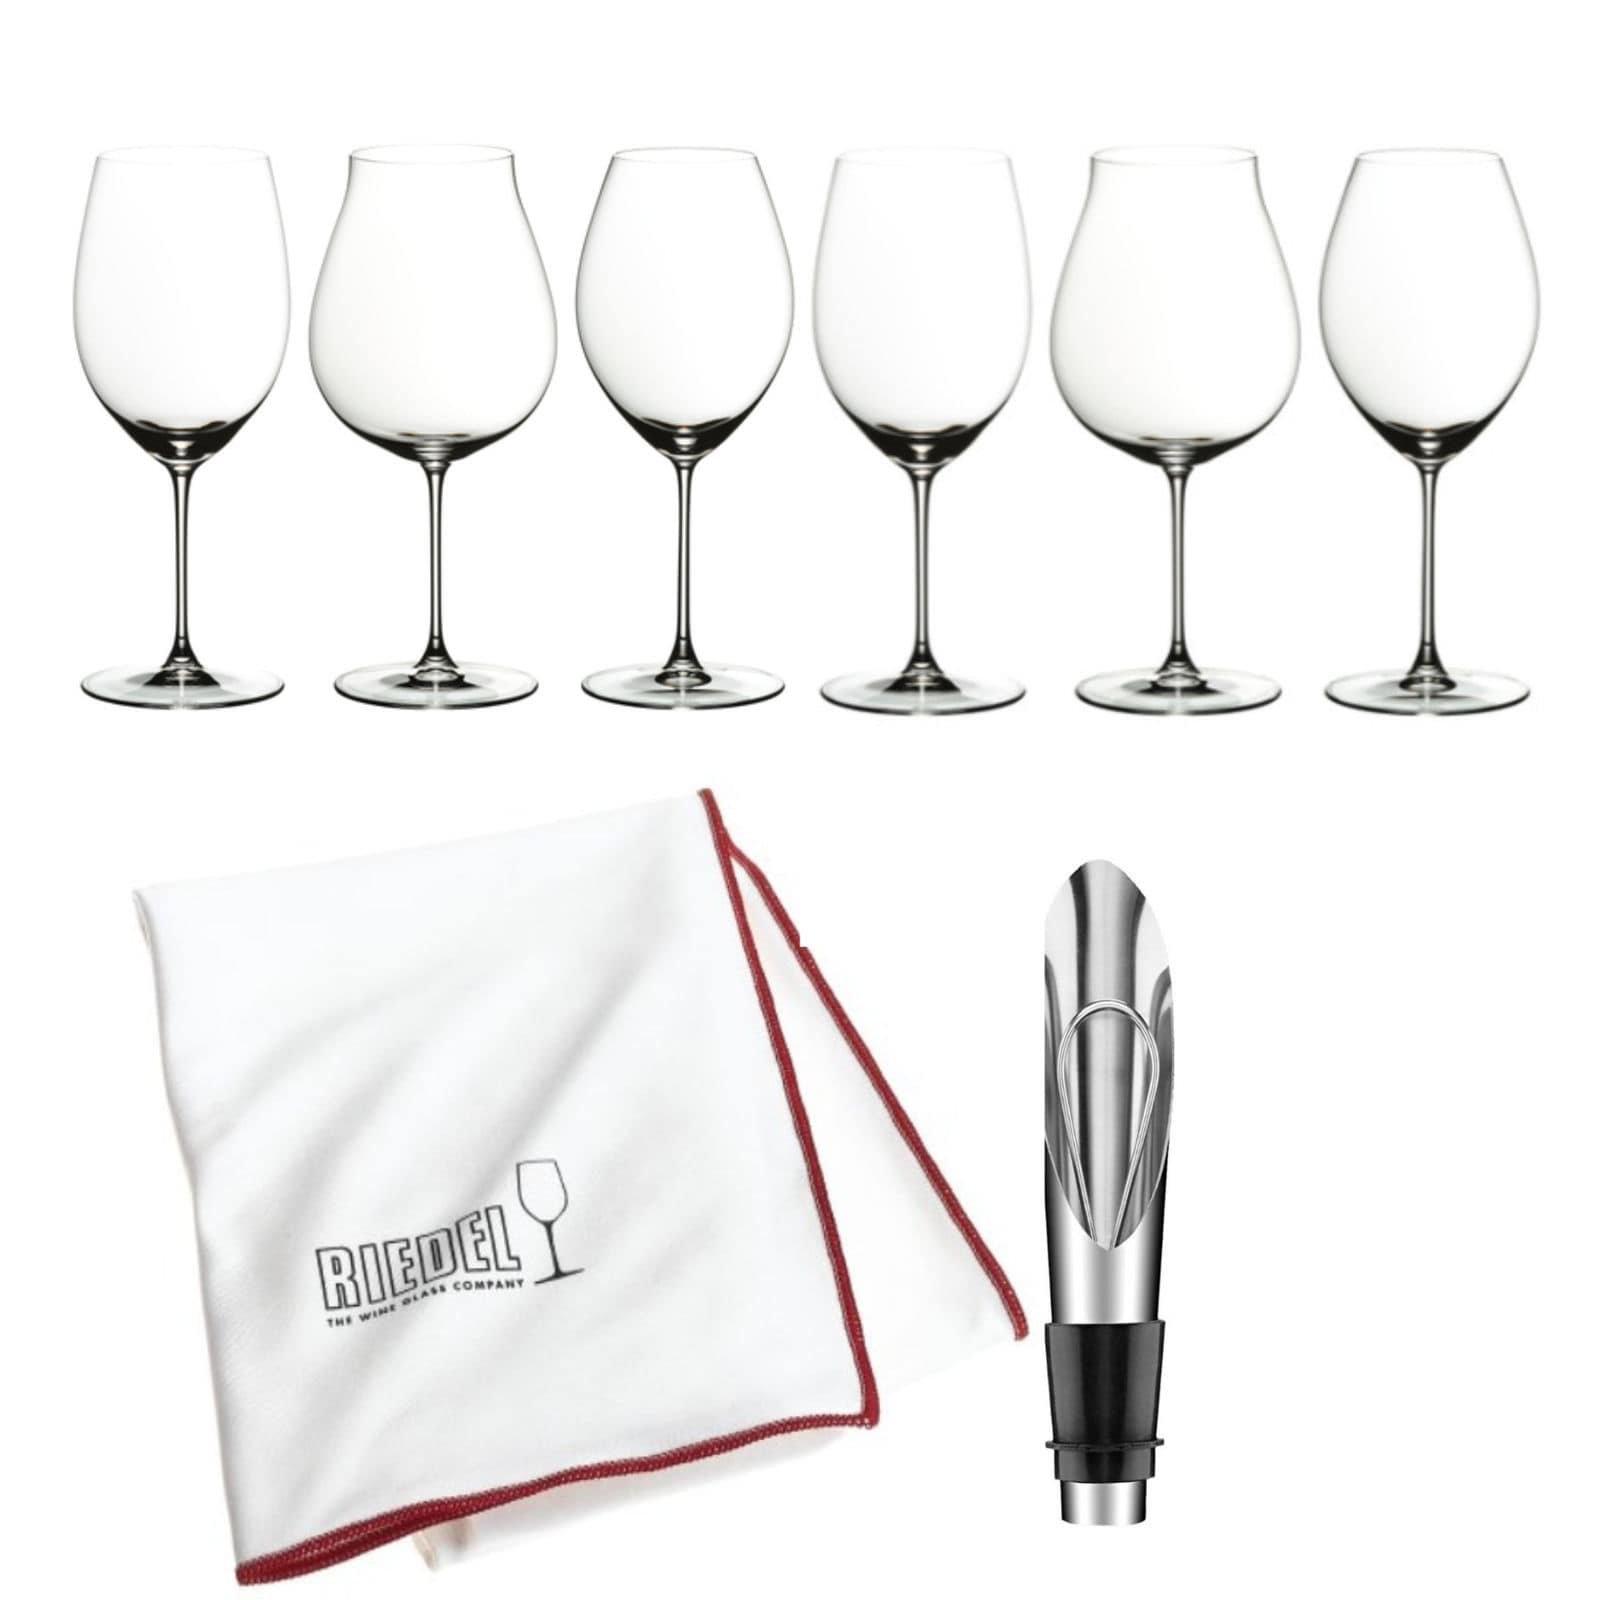 https://ak1.ostkcdn.com/images/products/is/images/direct/fa283cb73a10cf3eb13f1a57aad438ae0c57811c/Riedel-Veritas-Red-Wine-Tasting-Set-%28Set-of-6%29-and-Wine-Stopper-Bundle.jpg